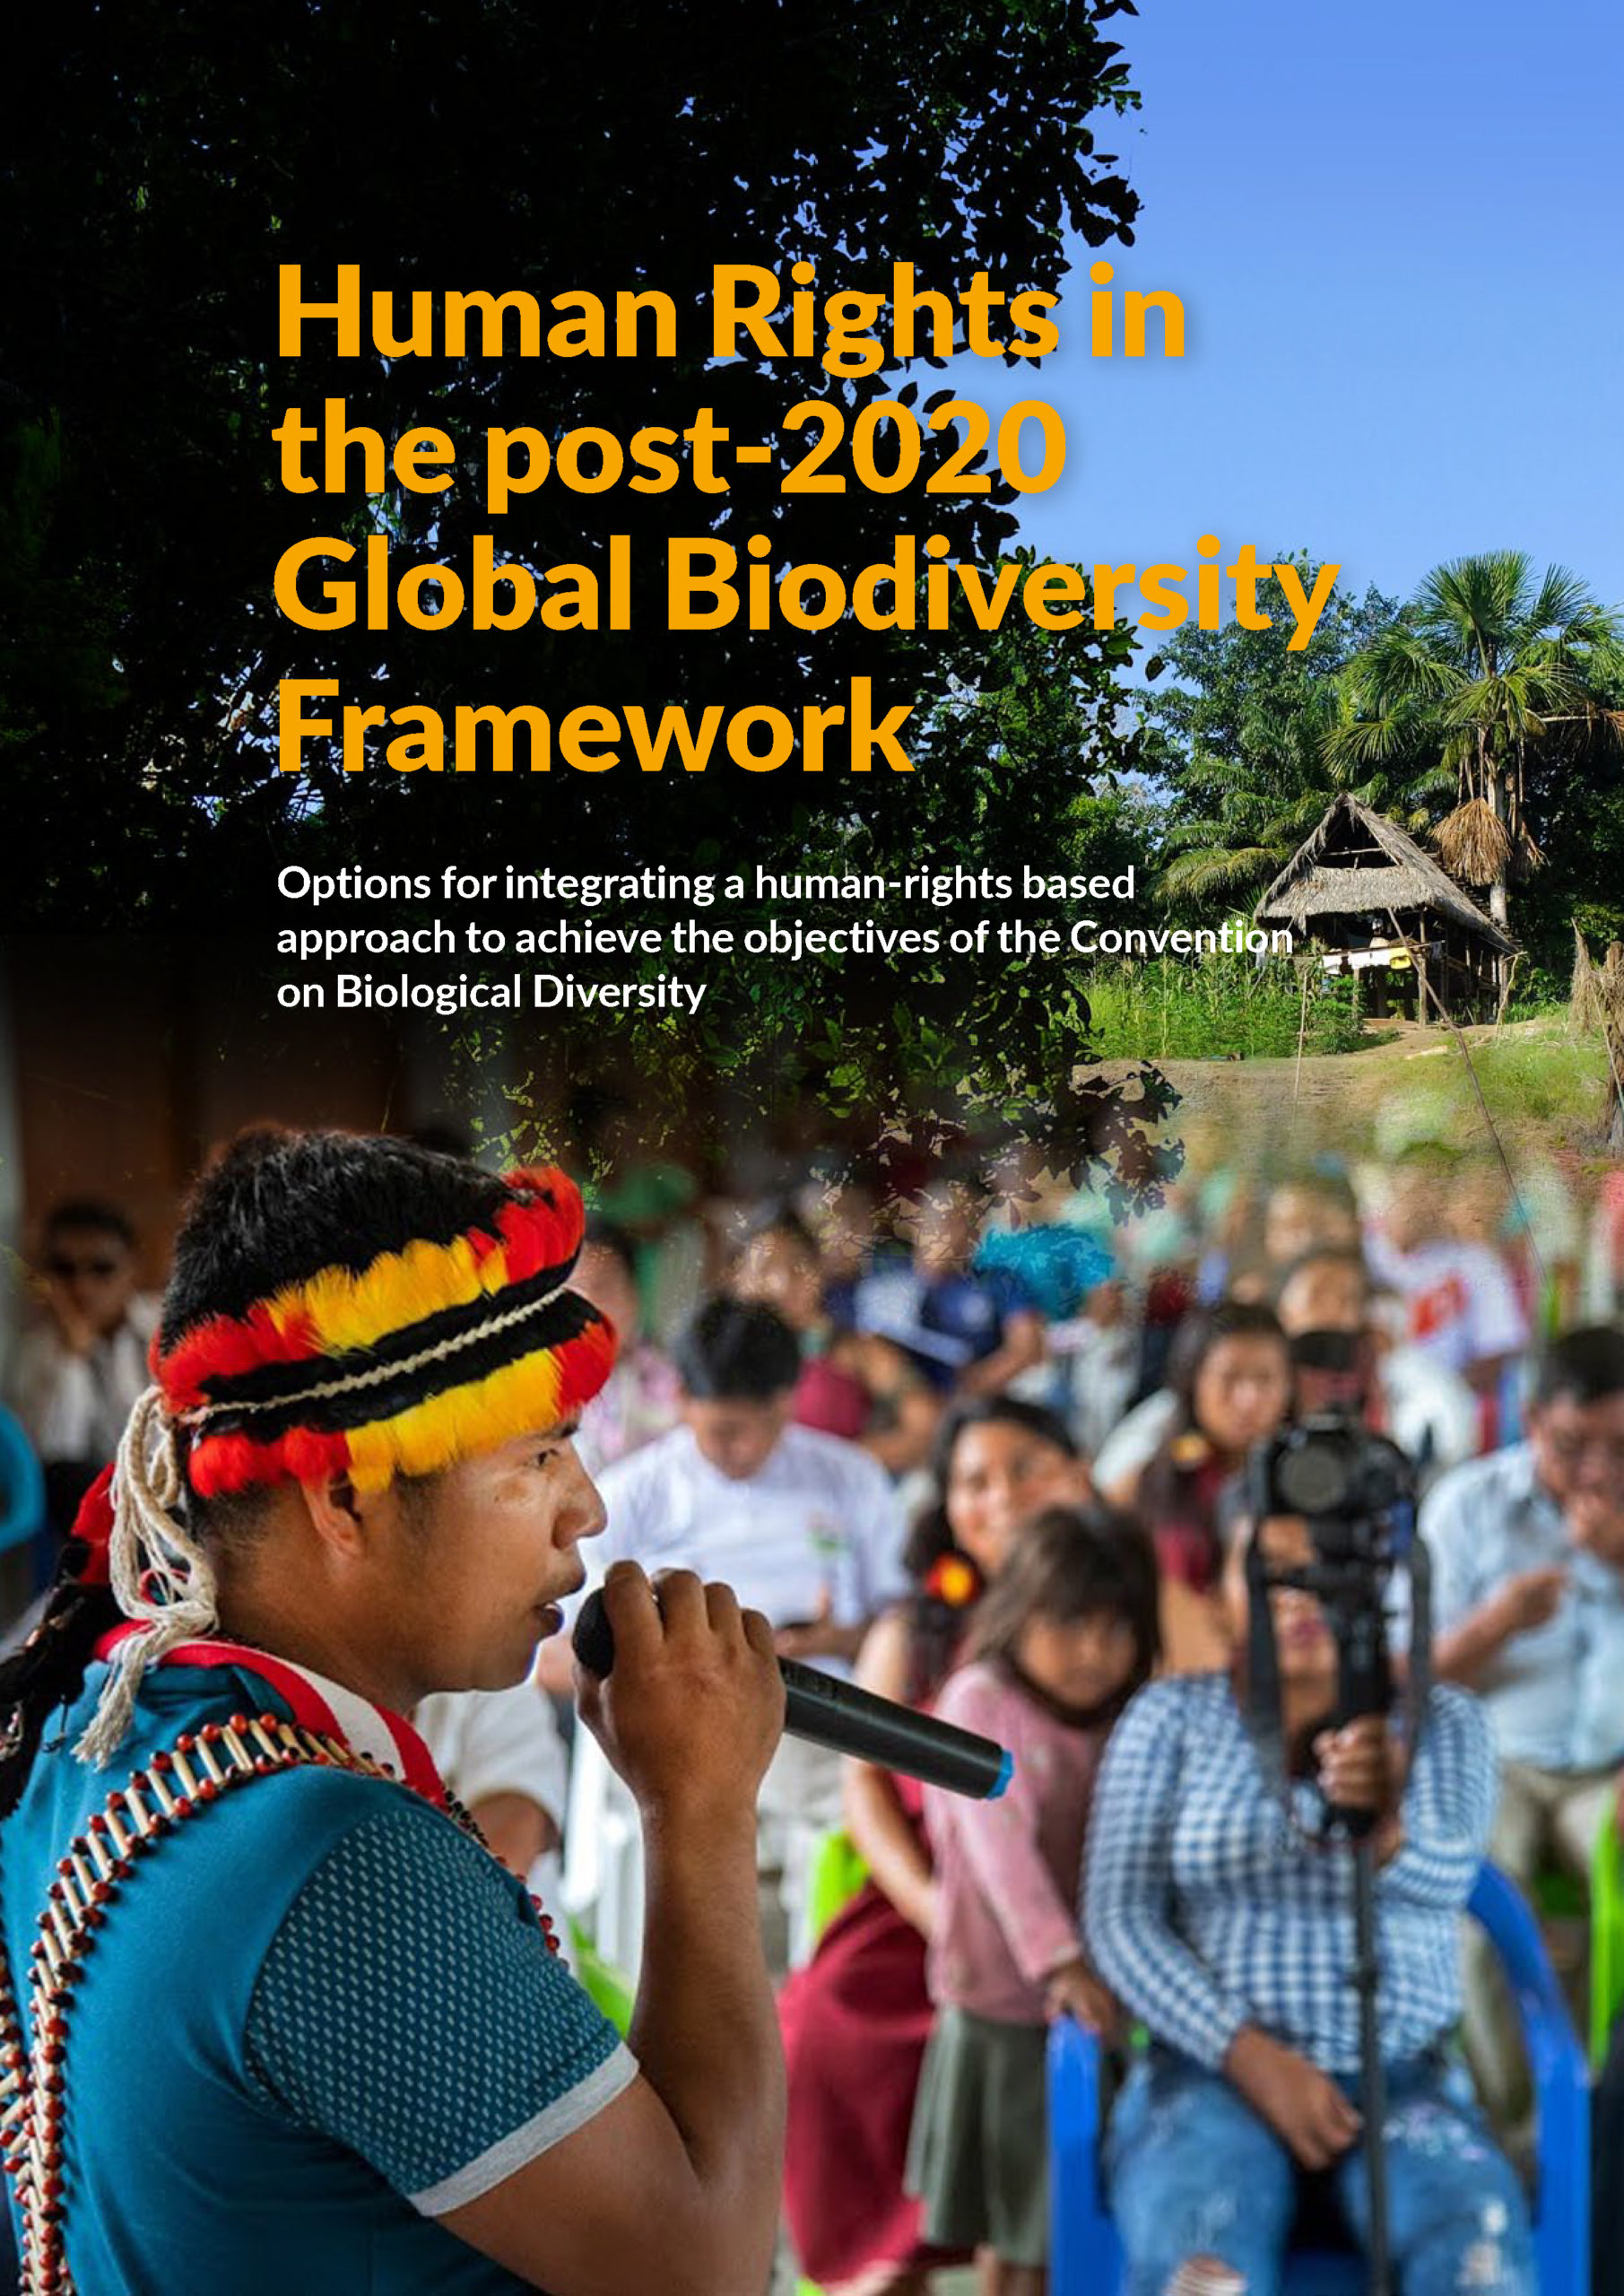 Integrating human rights into the post-2020 global biodiversity framework